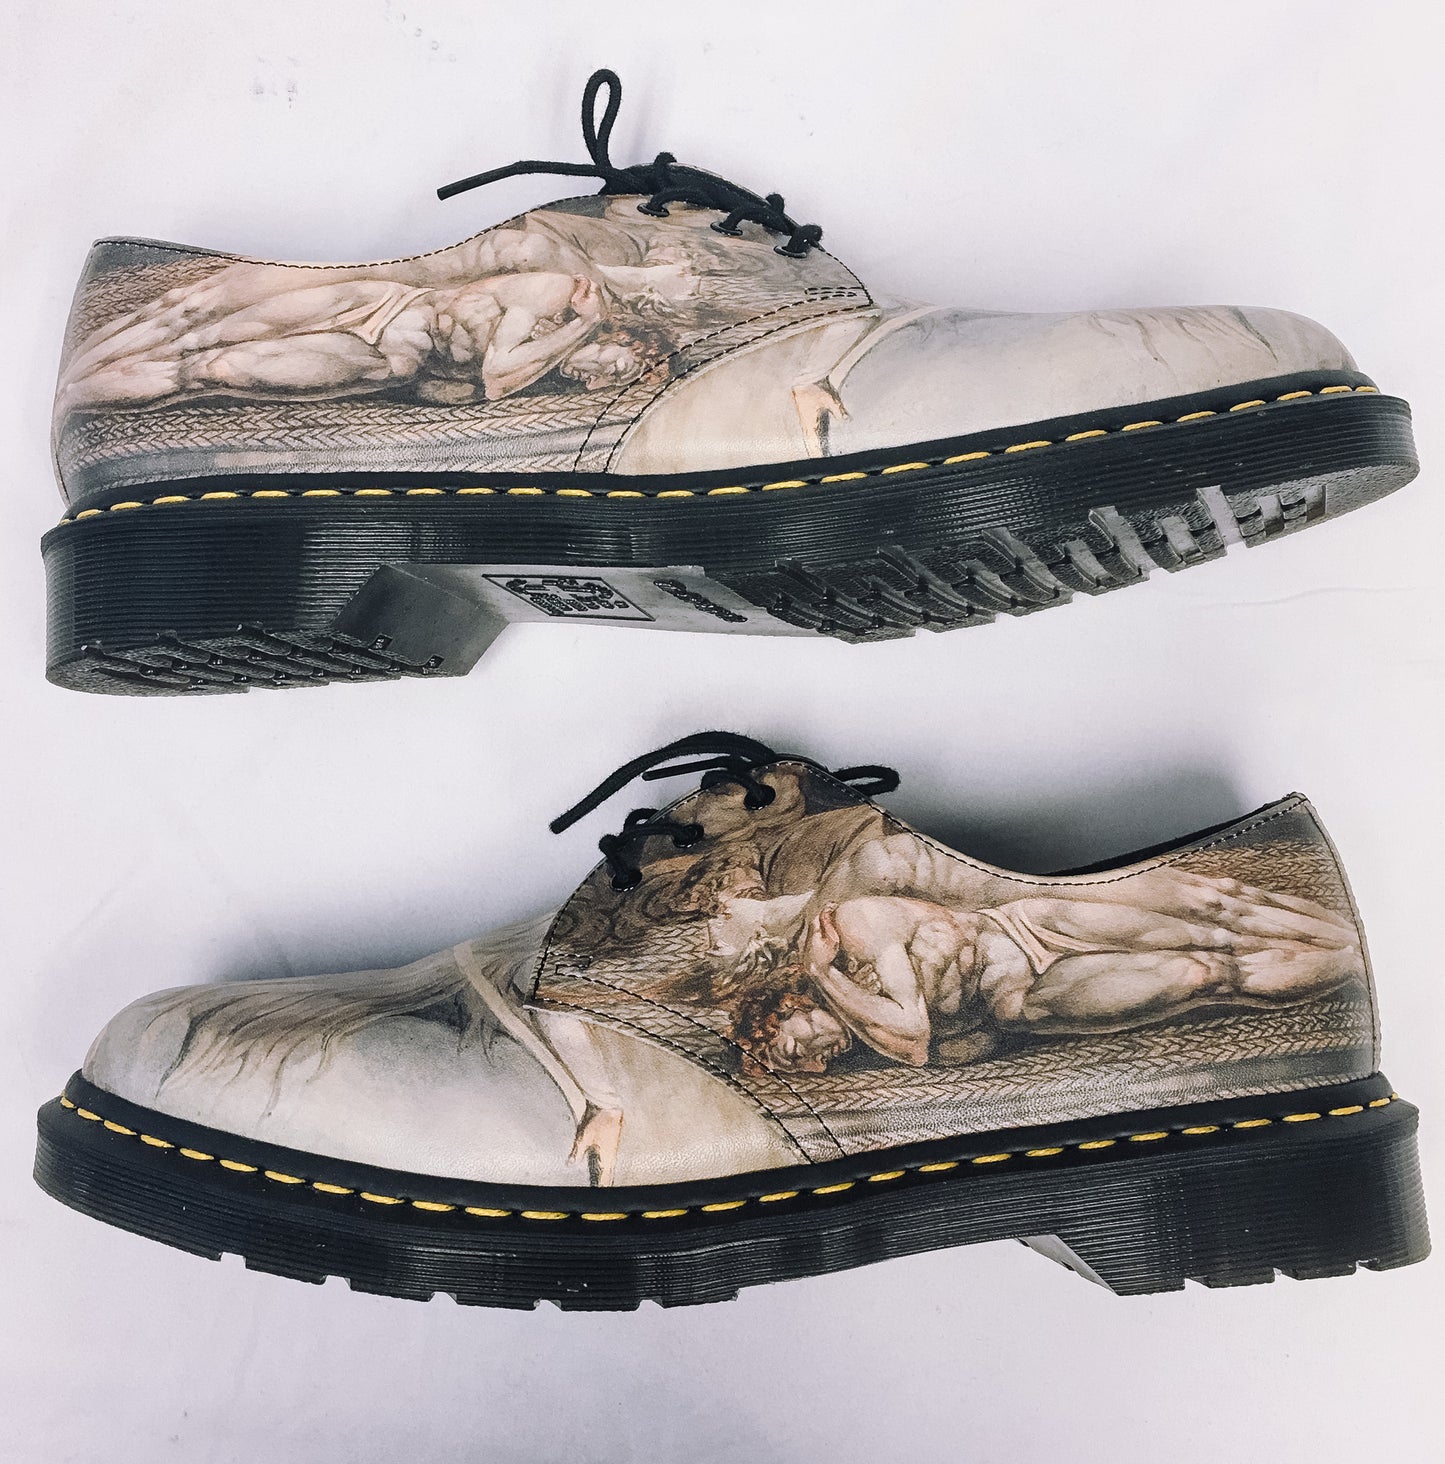 Dr. Martens 1461 x William Blake "House of Death" Oxford Loafers, Men's Sz. 12